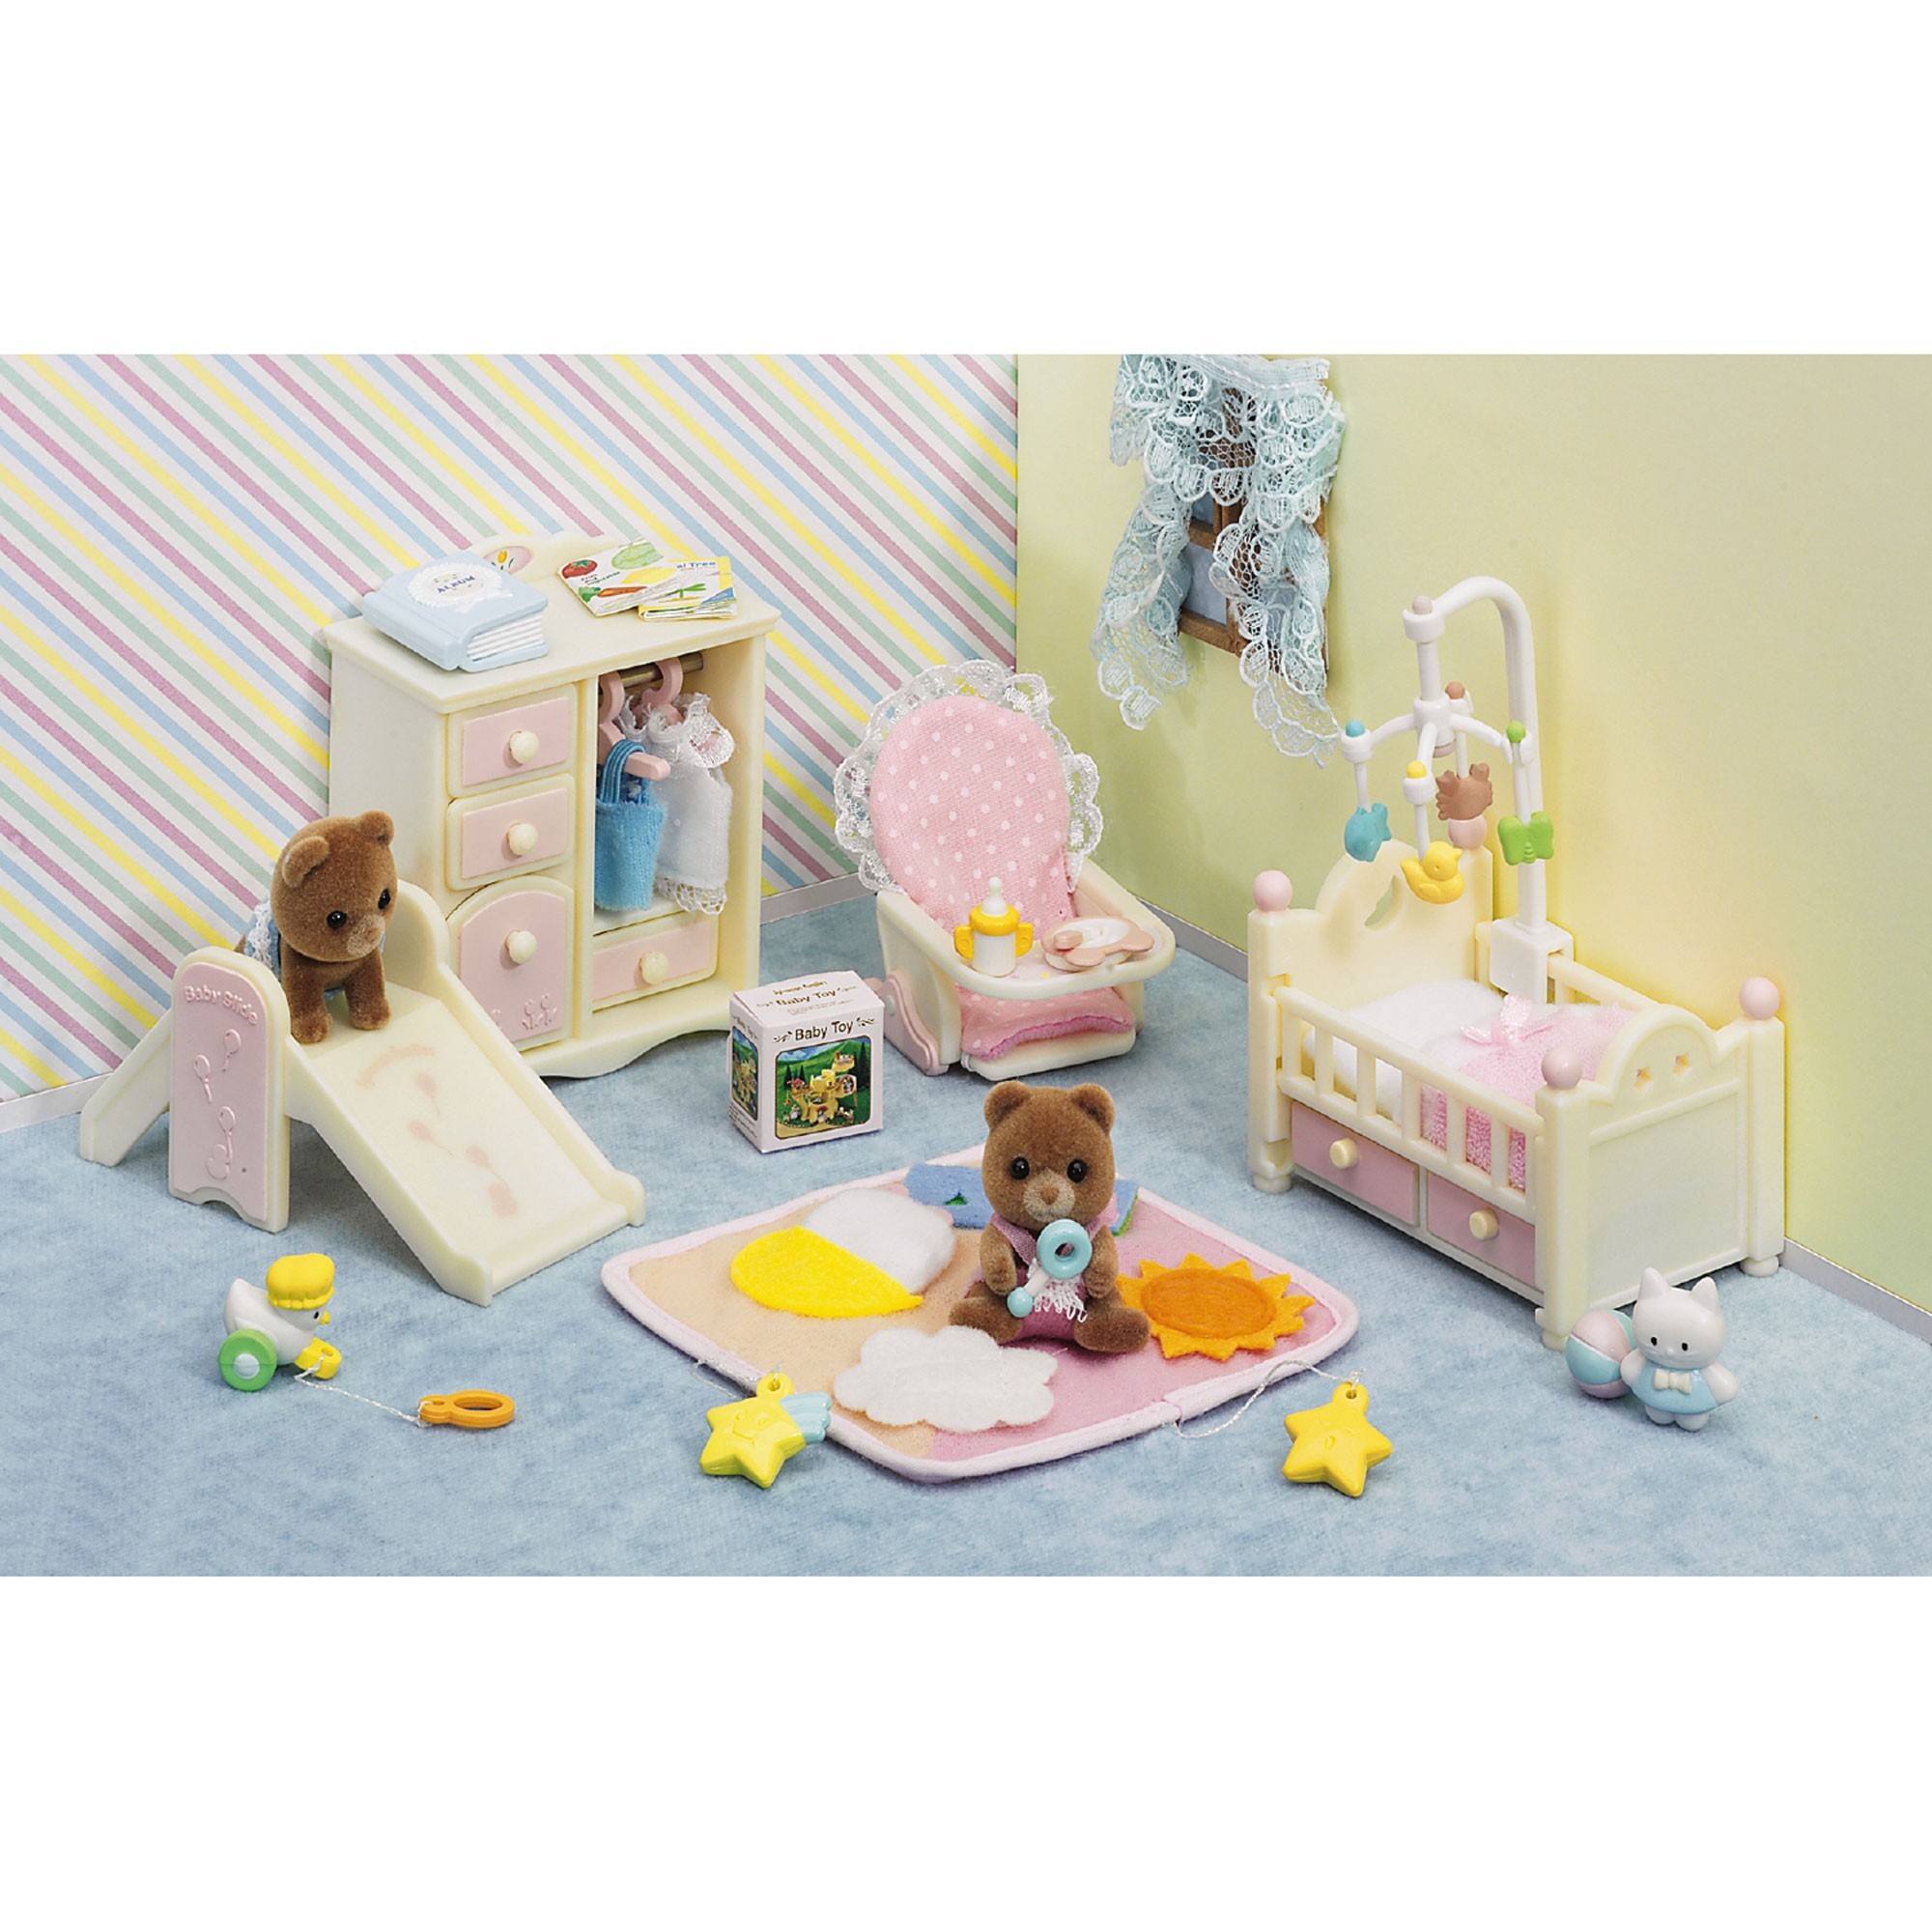 Toddler Shop Calico Critters Toys Books HD Walls Find Wallpaper